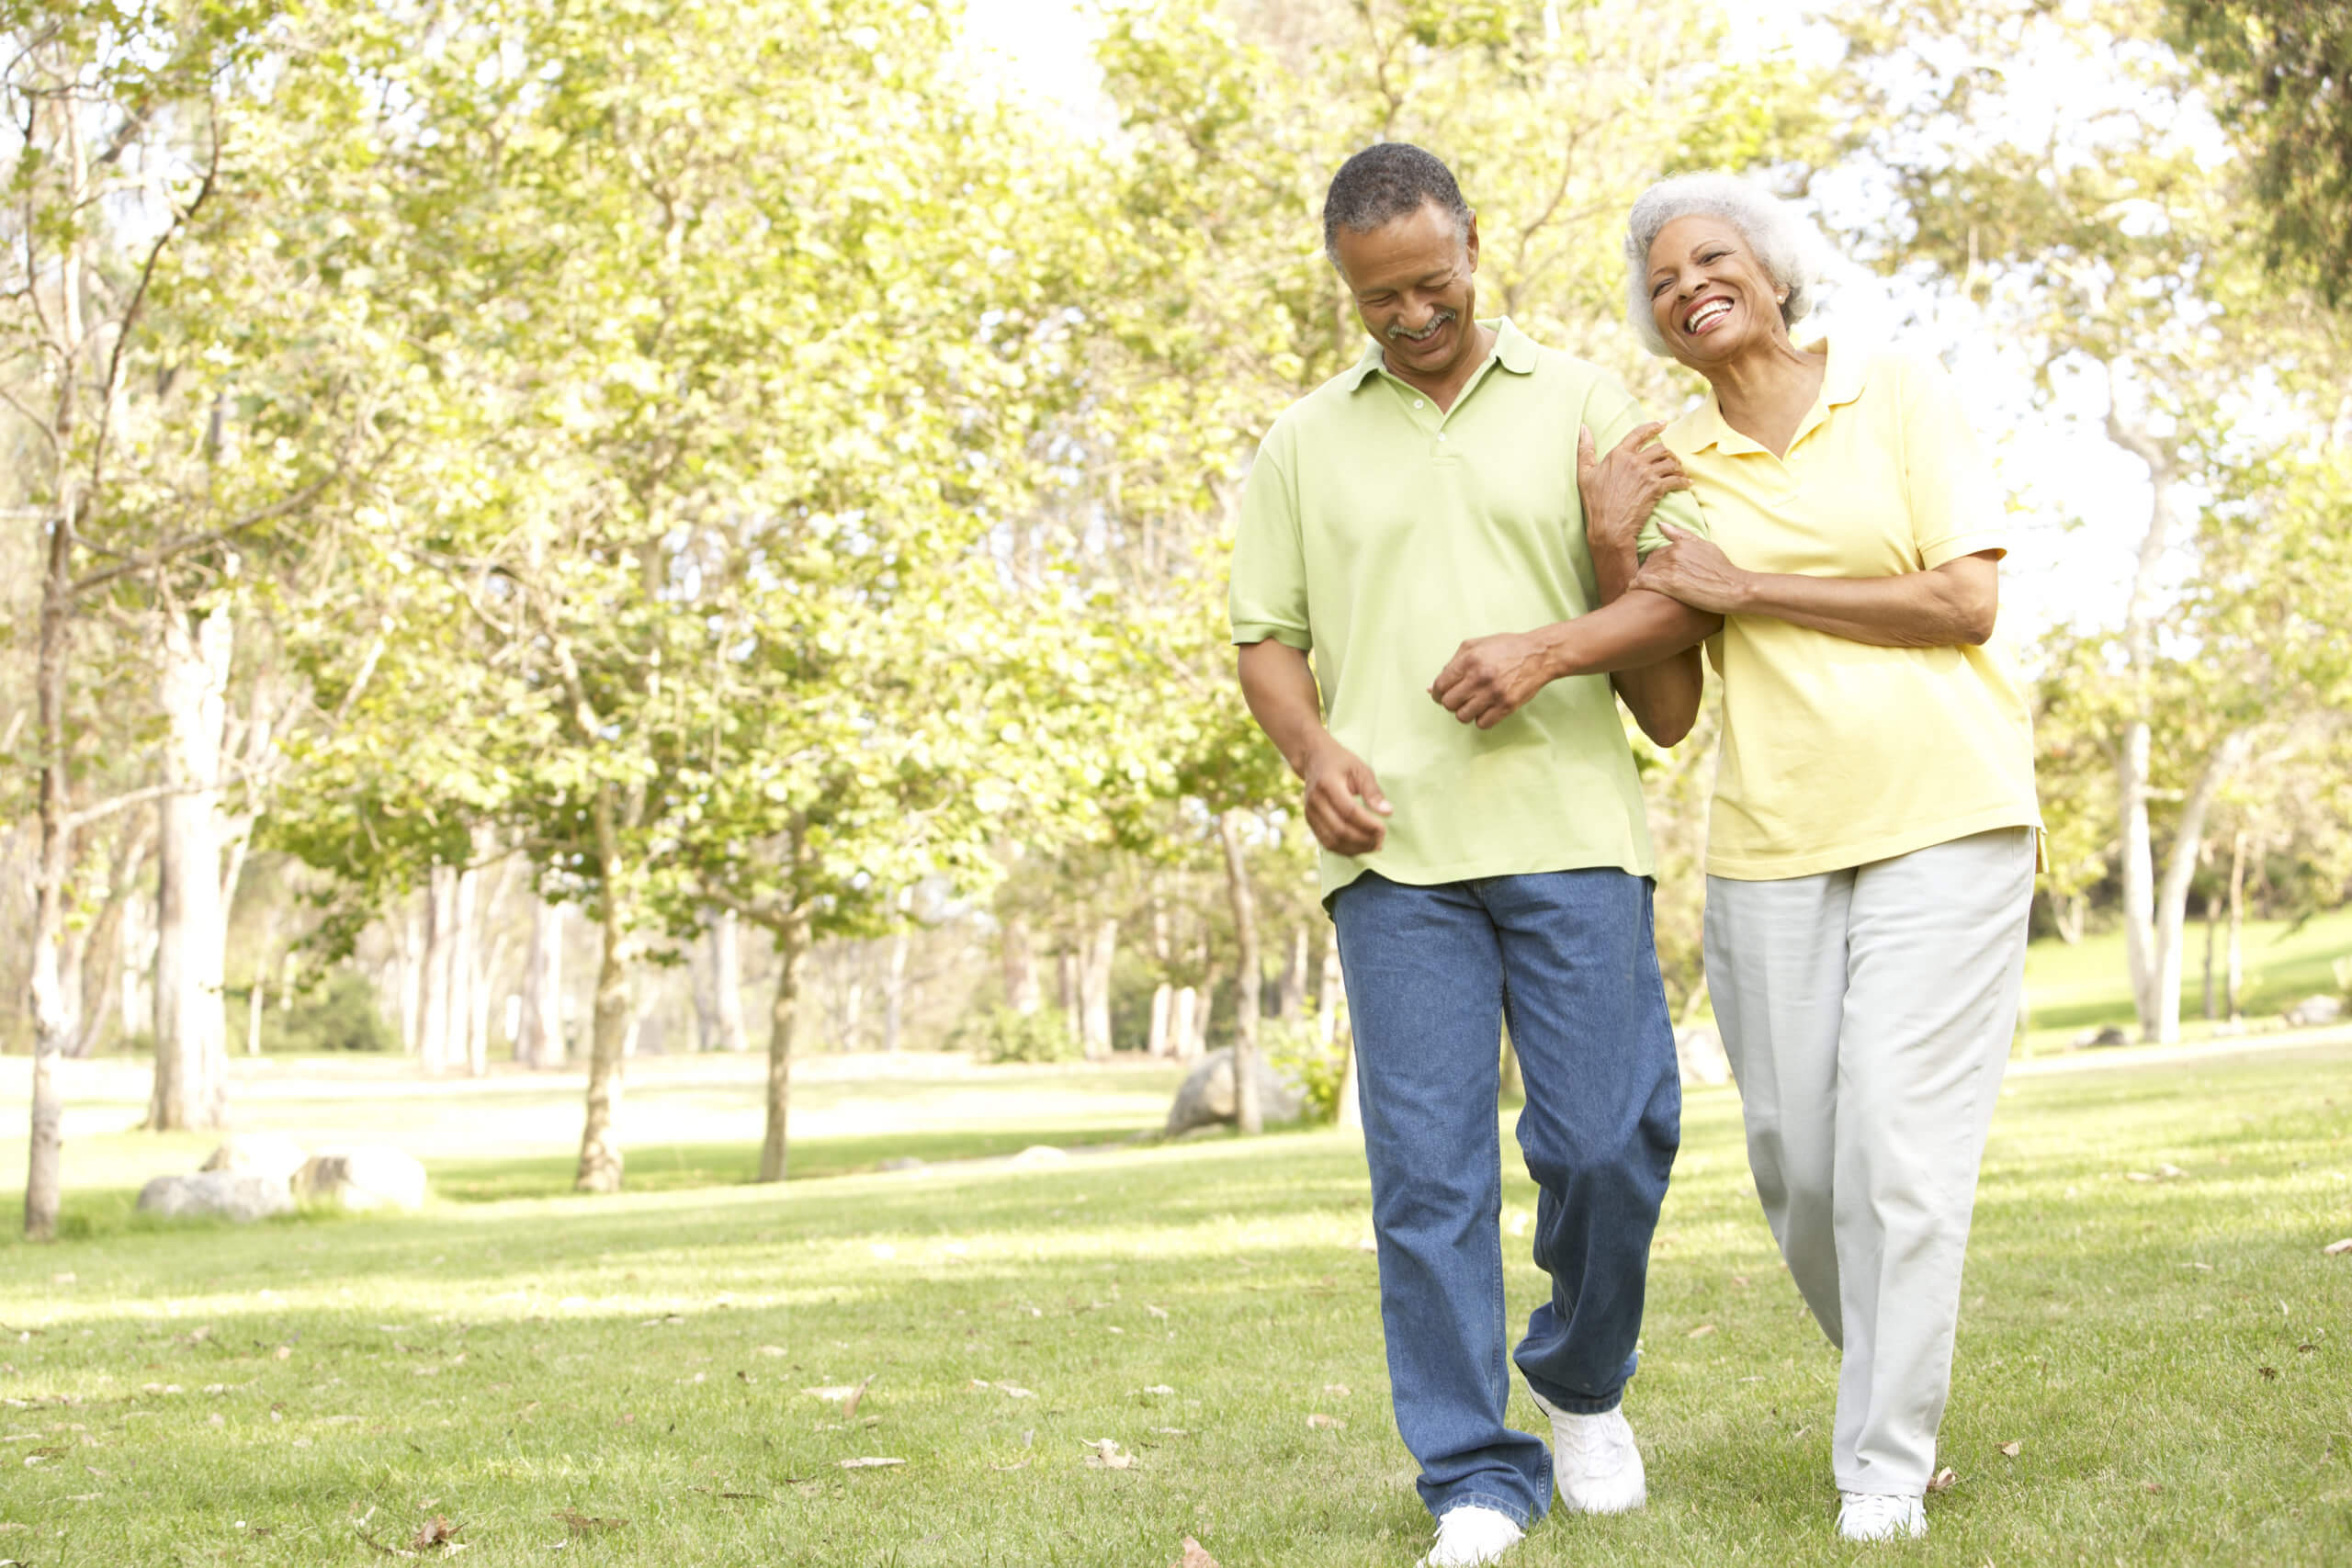 Smiling older Black couple walks together in a park in Long Island, NY.